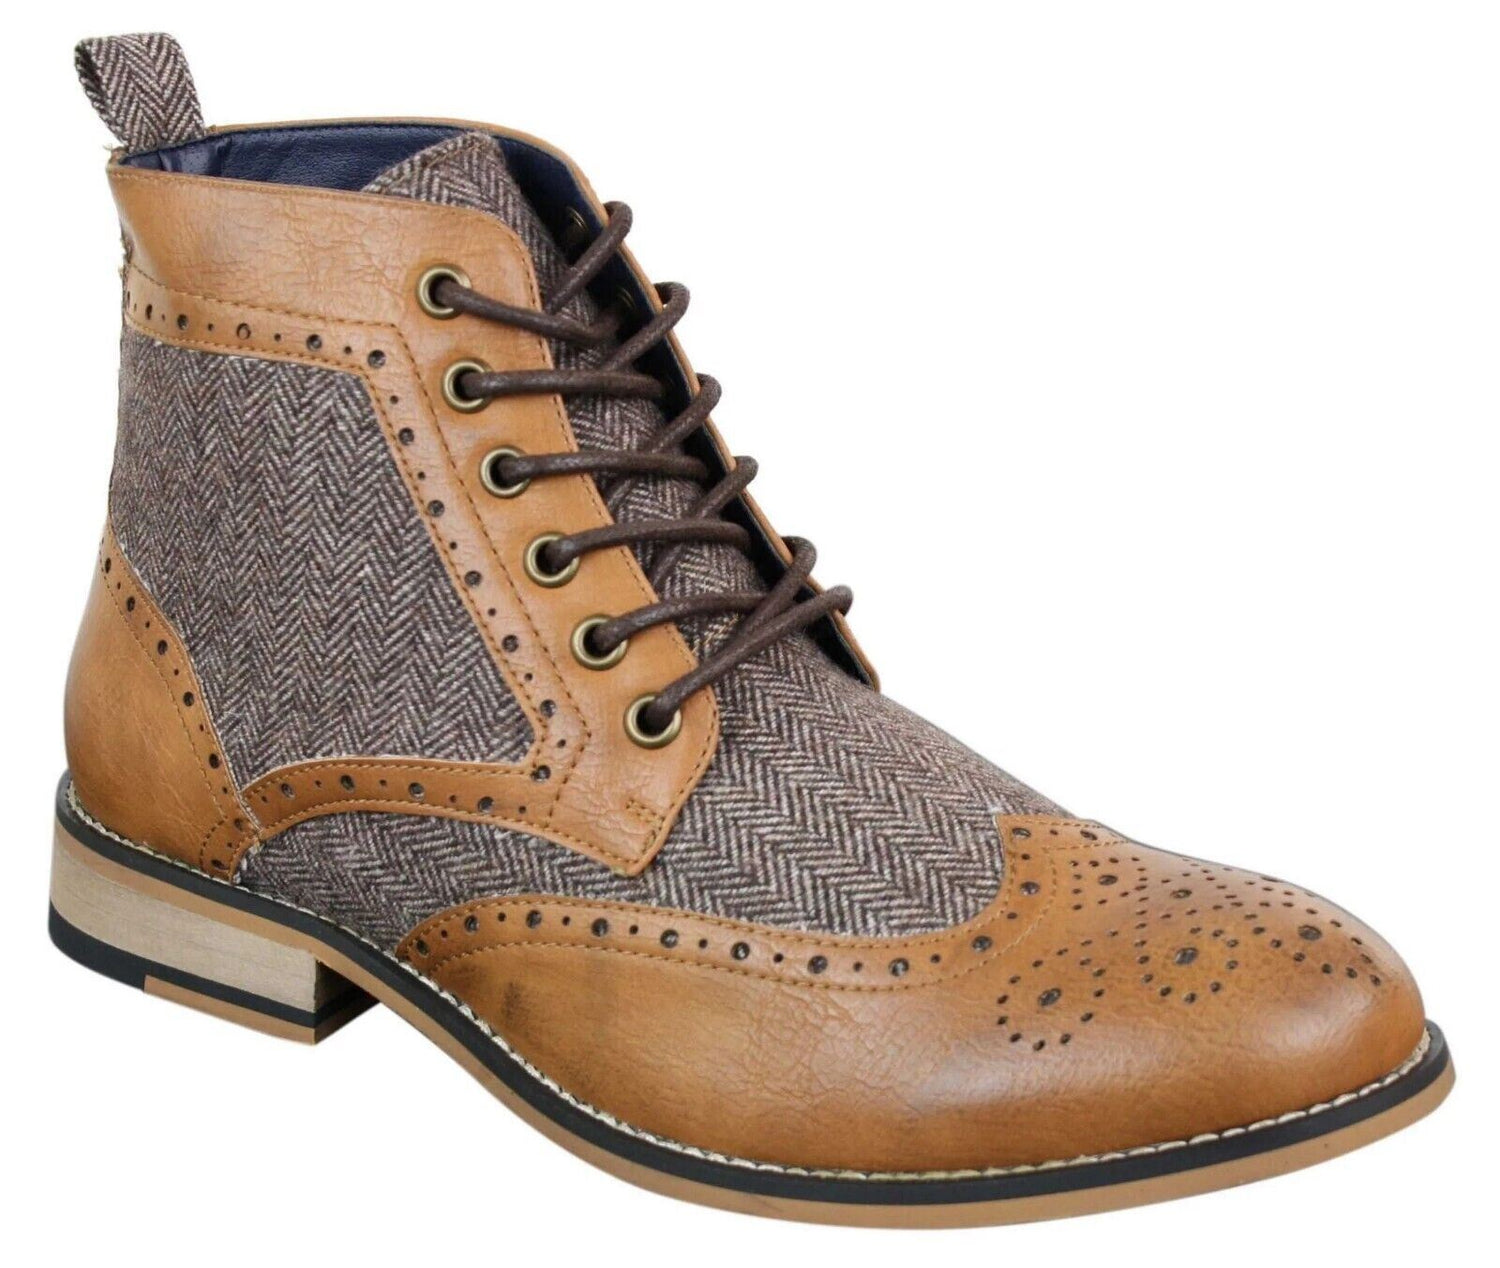 Mens Classic Tweed Oxford Ankle Boots in Tan Leather - Upperclass Fashions 